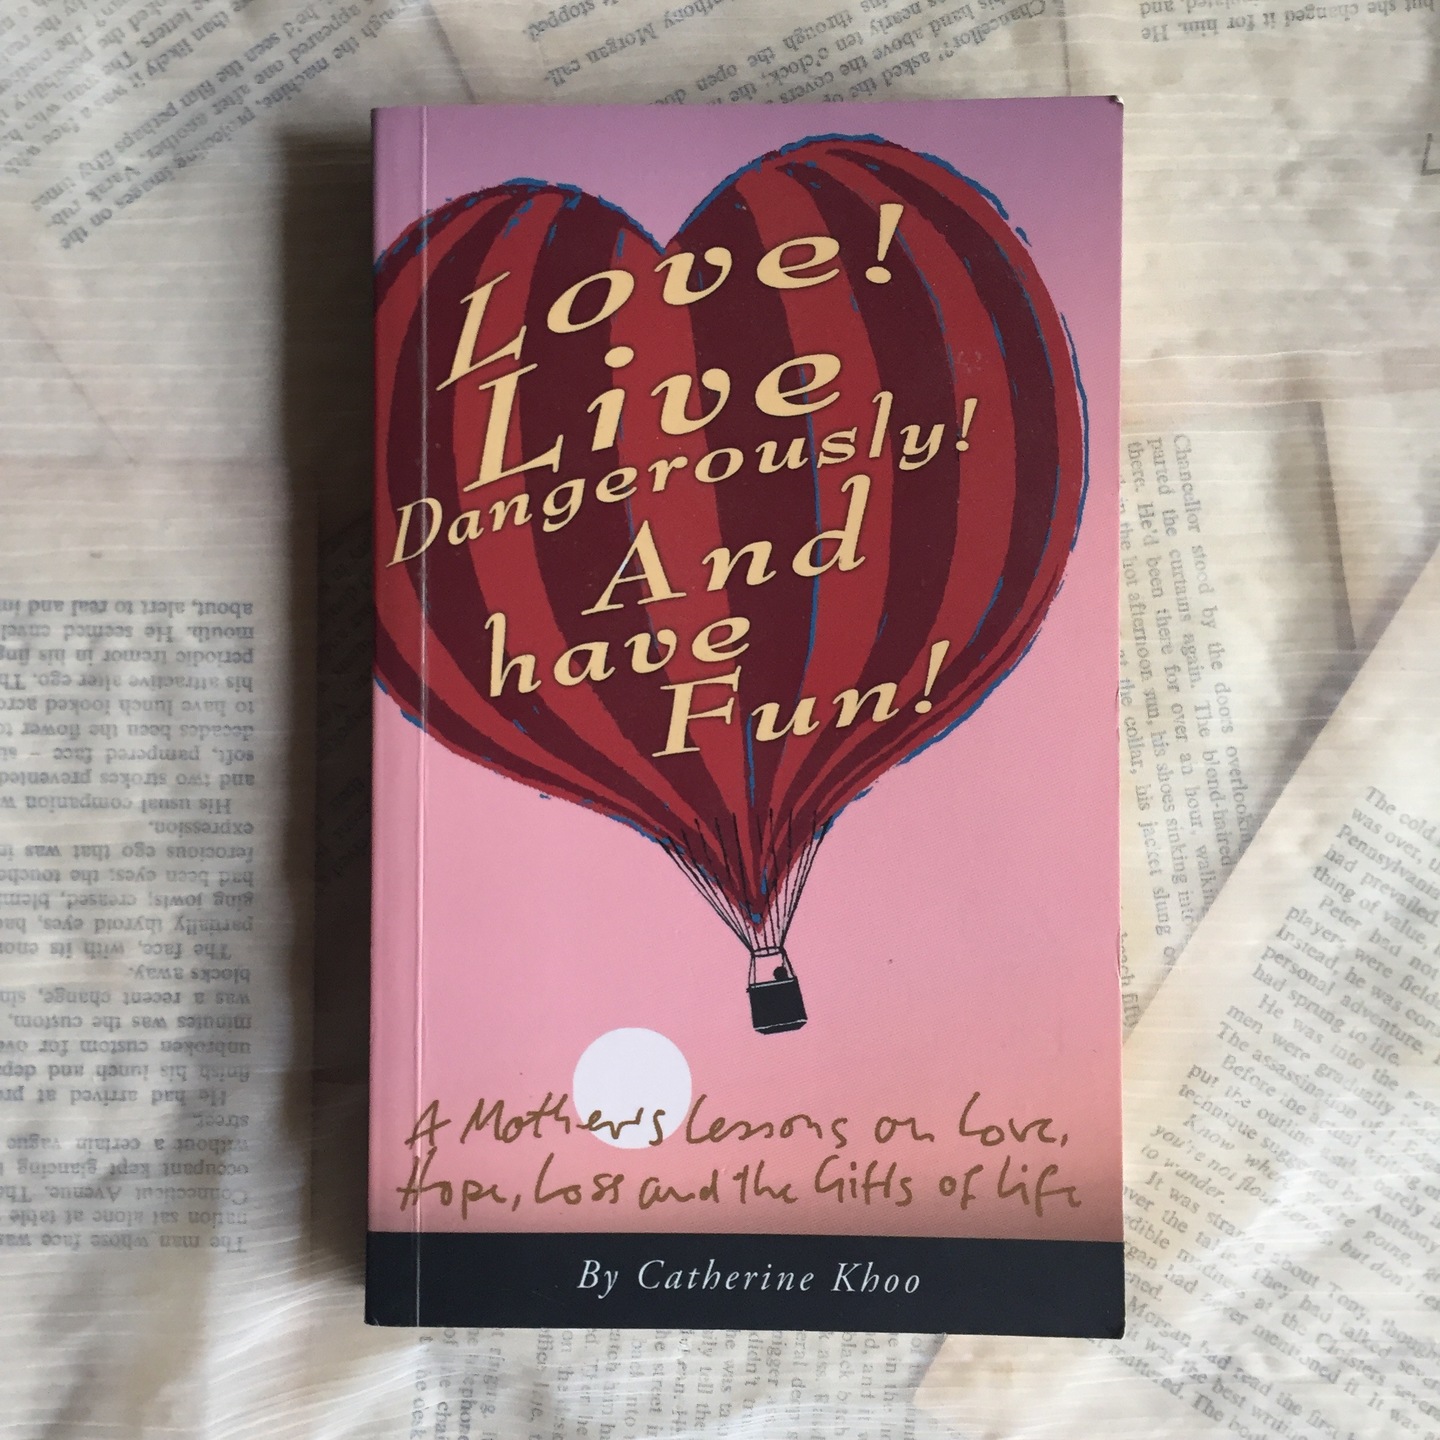 Love! Live Dangerously! And Have Fun! by Catherine Khoo [Paperback]